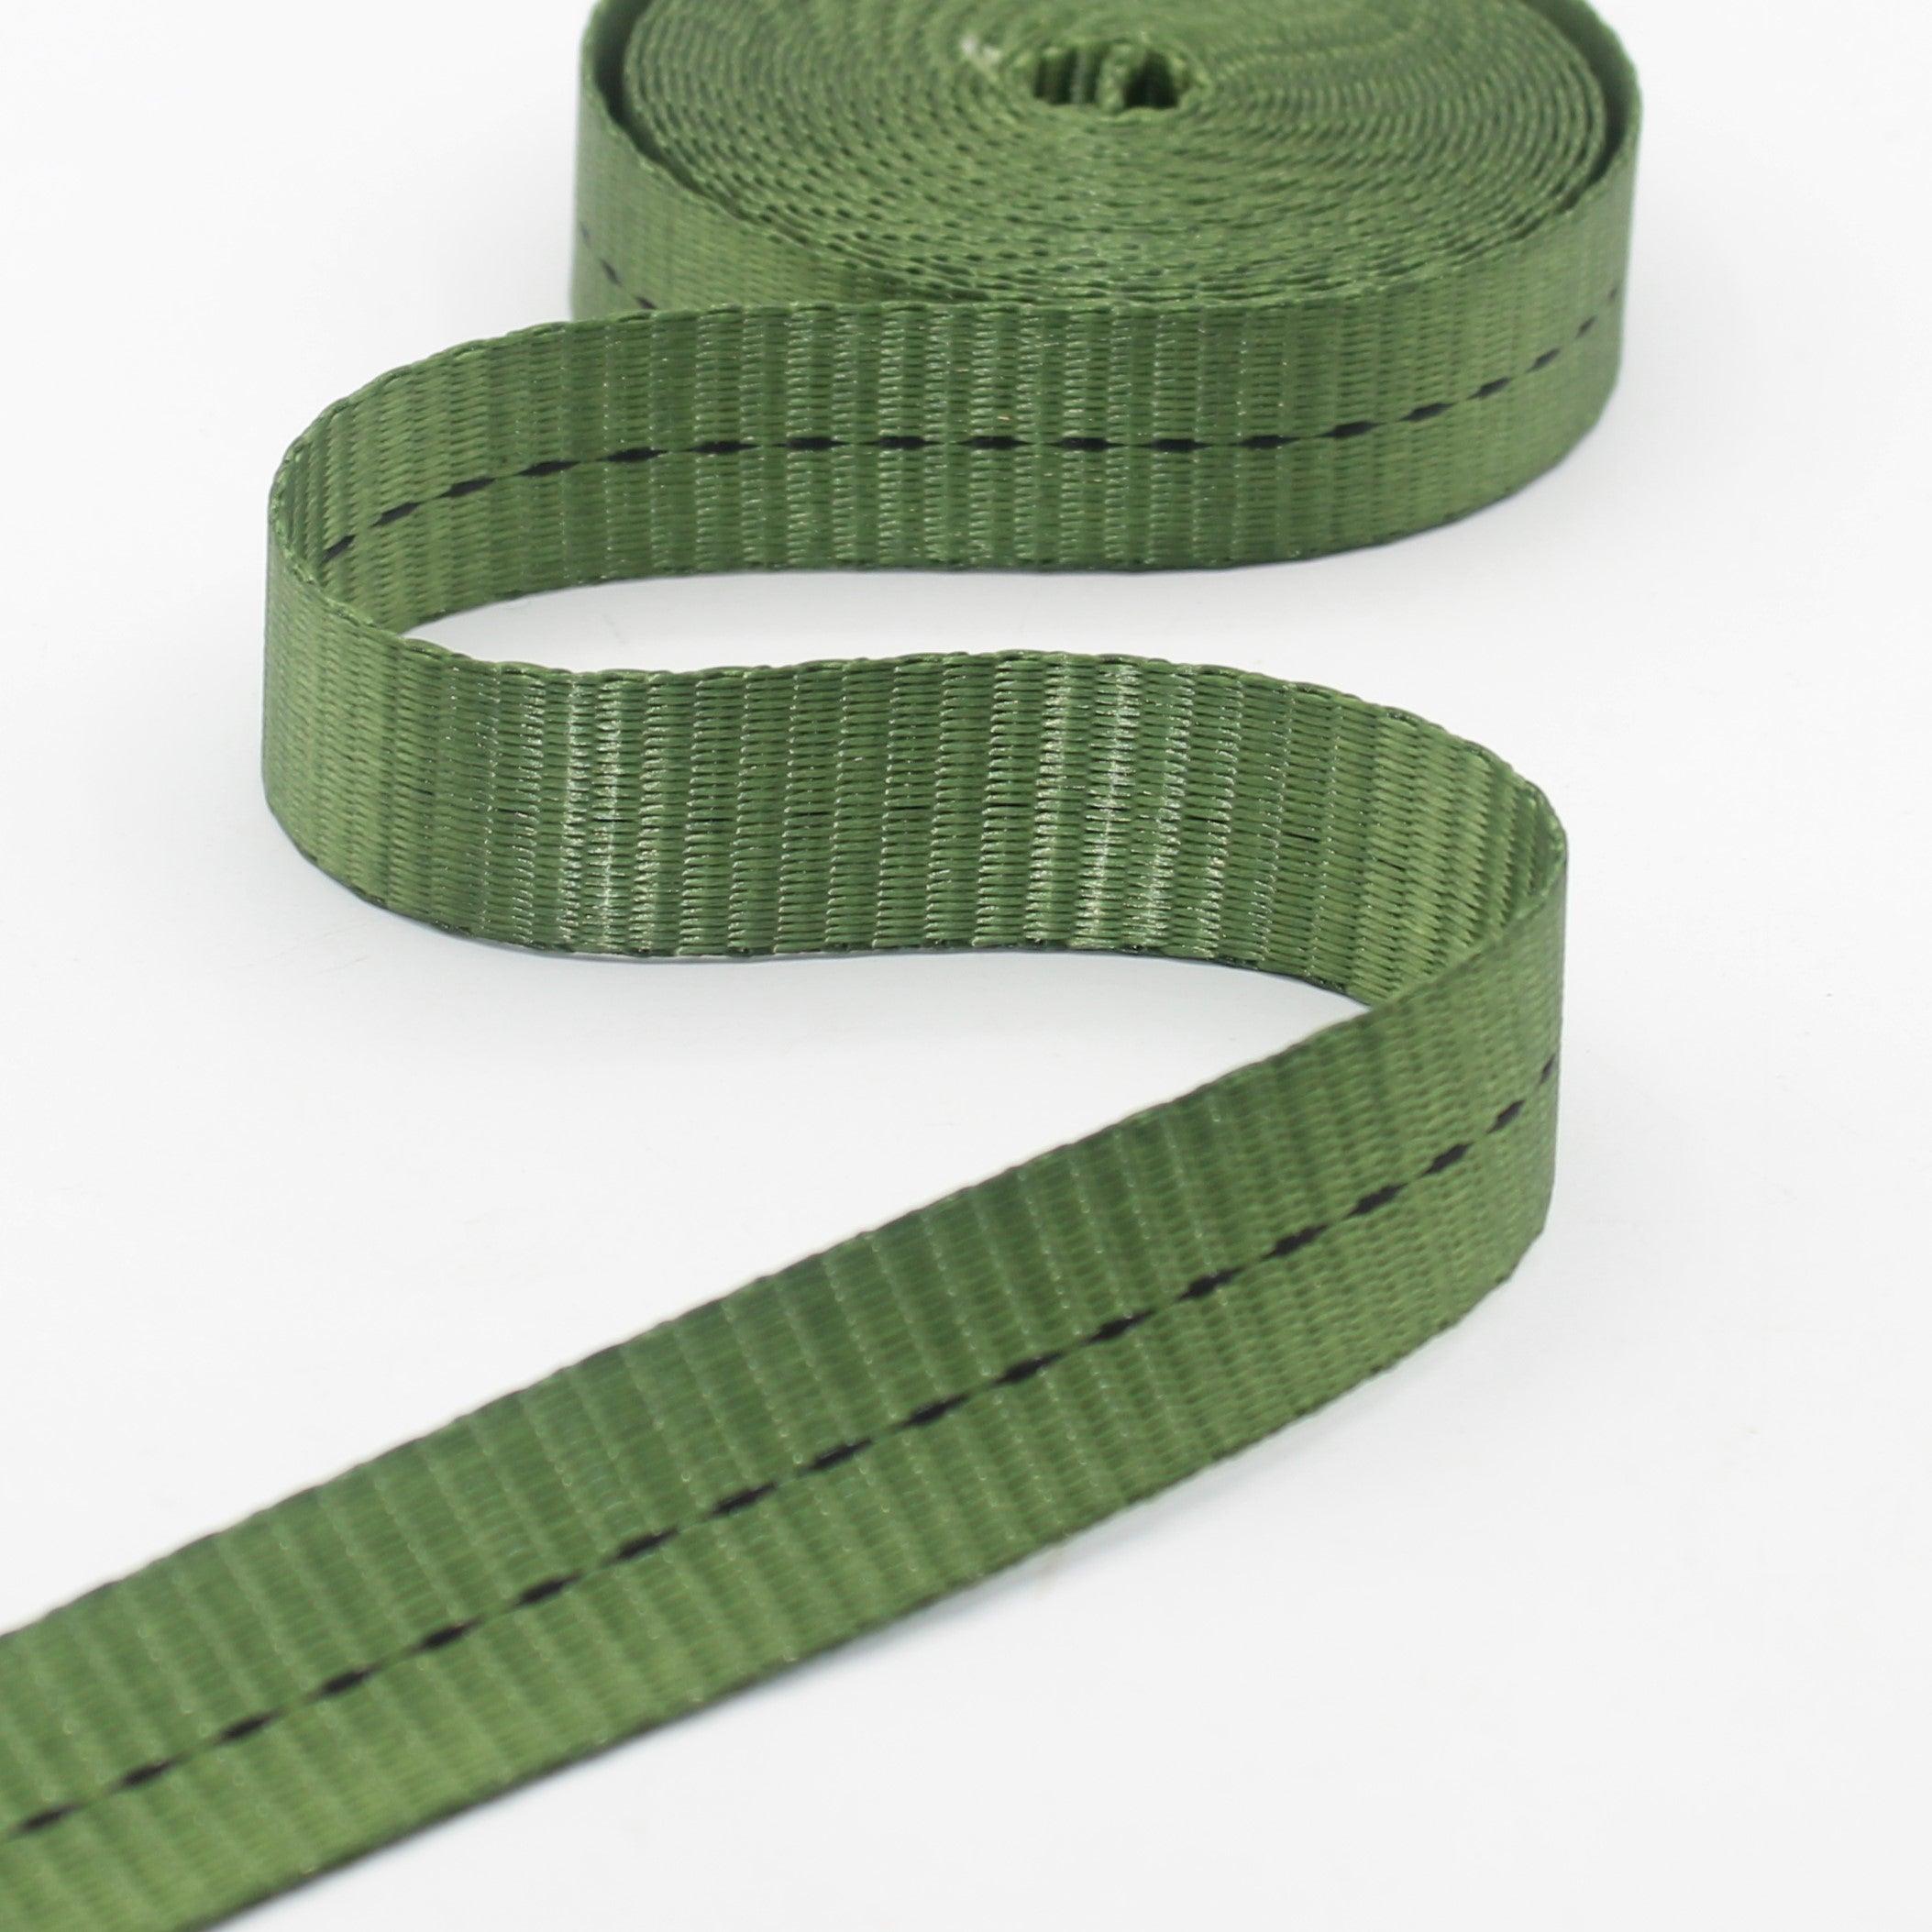 10 meters 25mm Polyester Webbing with Central Black Stitches #RUB3563 - ACCESSOIRES LEDUC BV